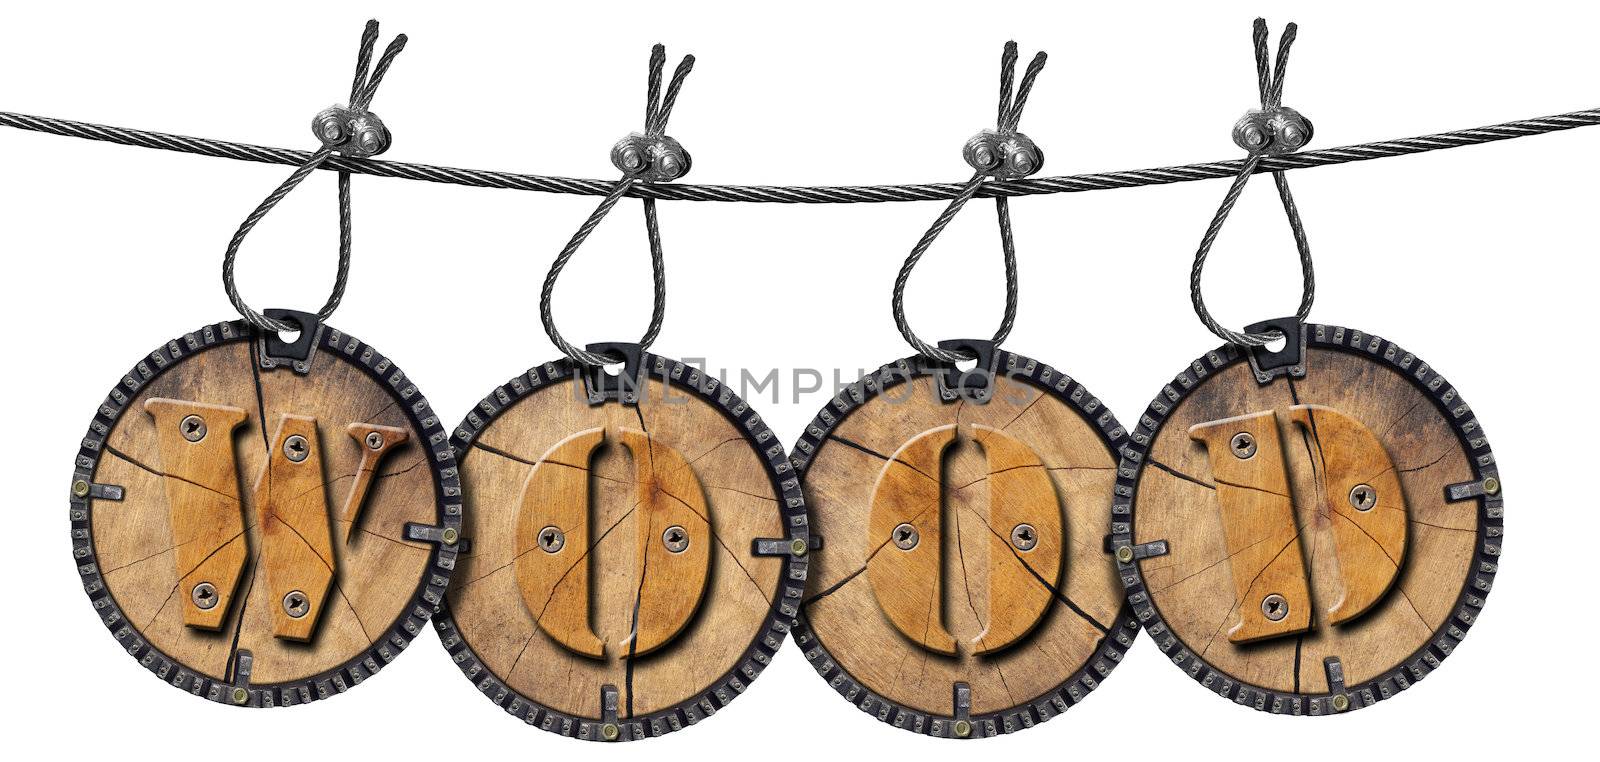 Written wood on four labels hanging on steel cable on white background
